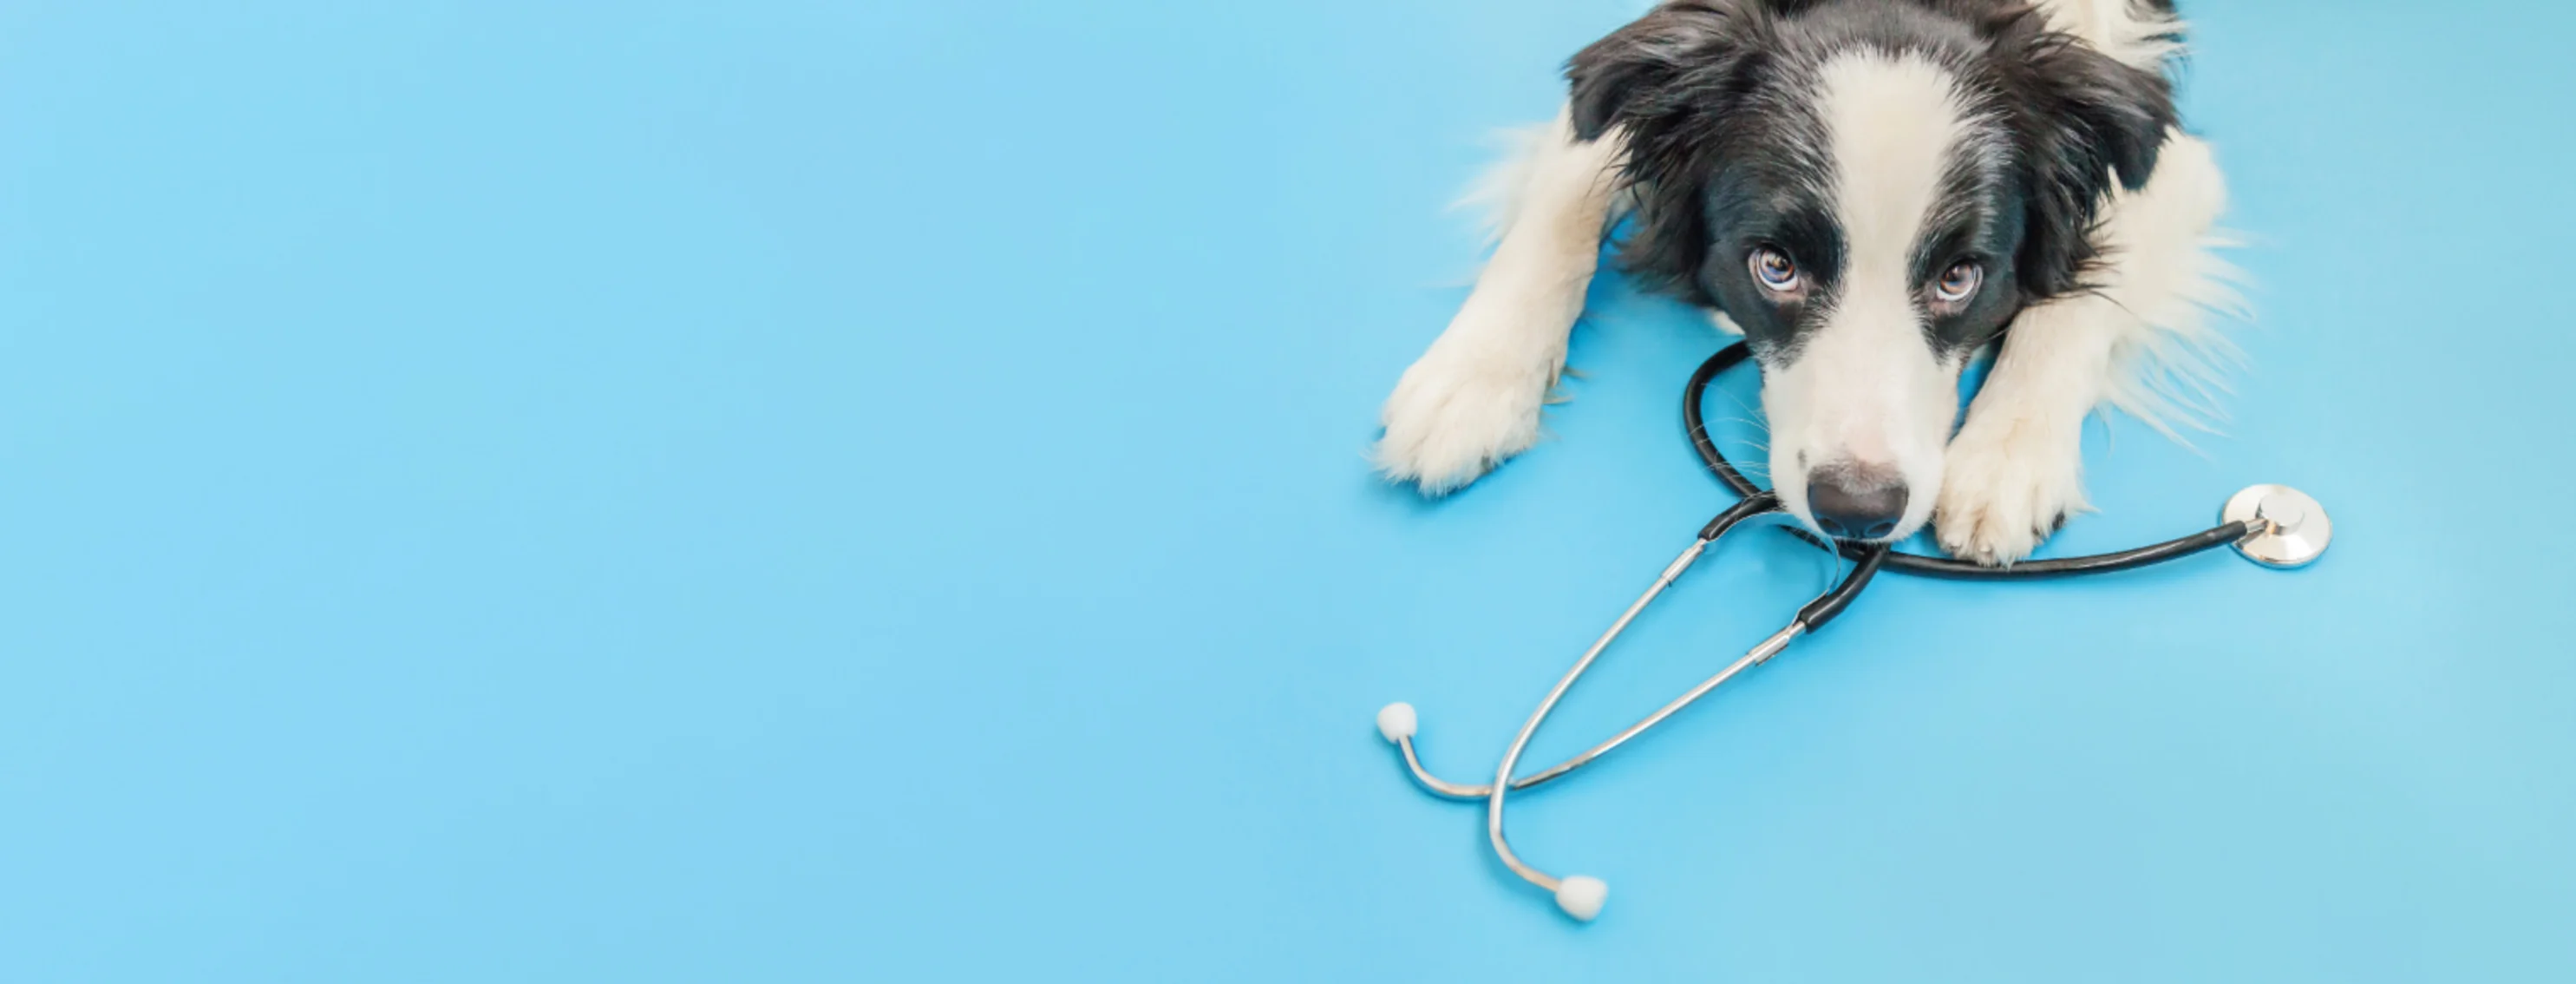 Border Collie (Dog) with Stethoscope on a Light Blue Studio Background